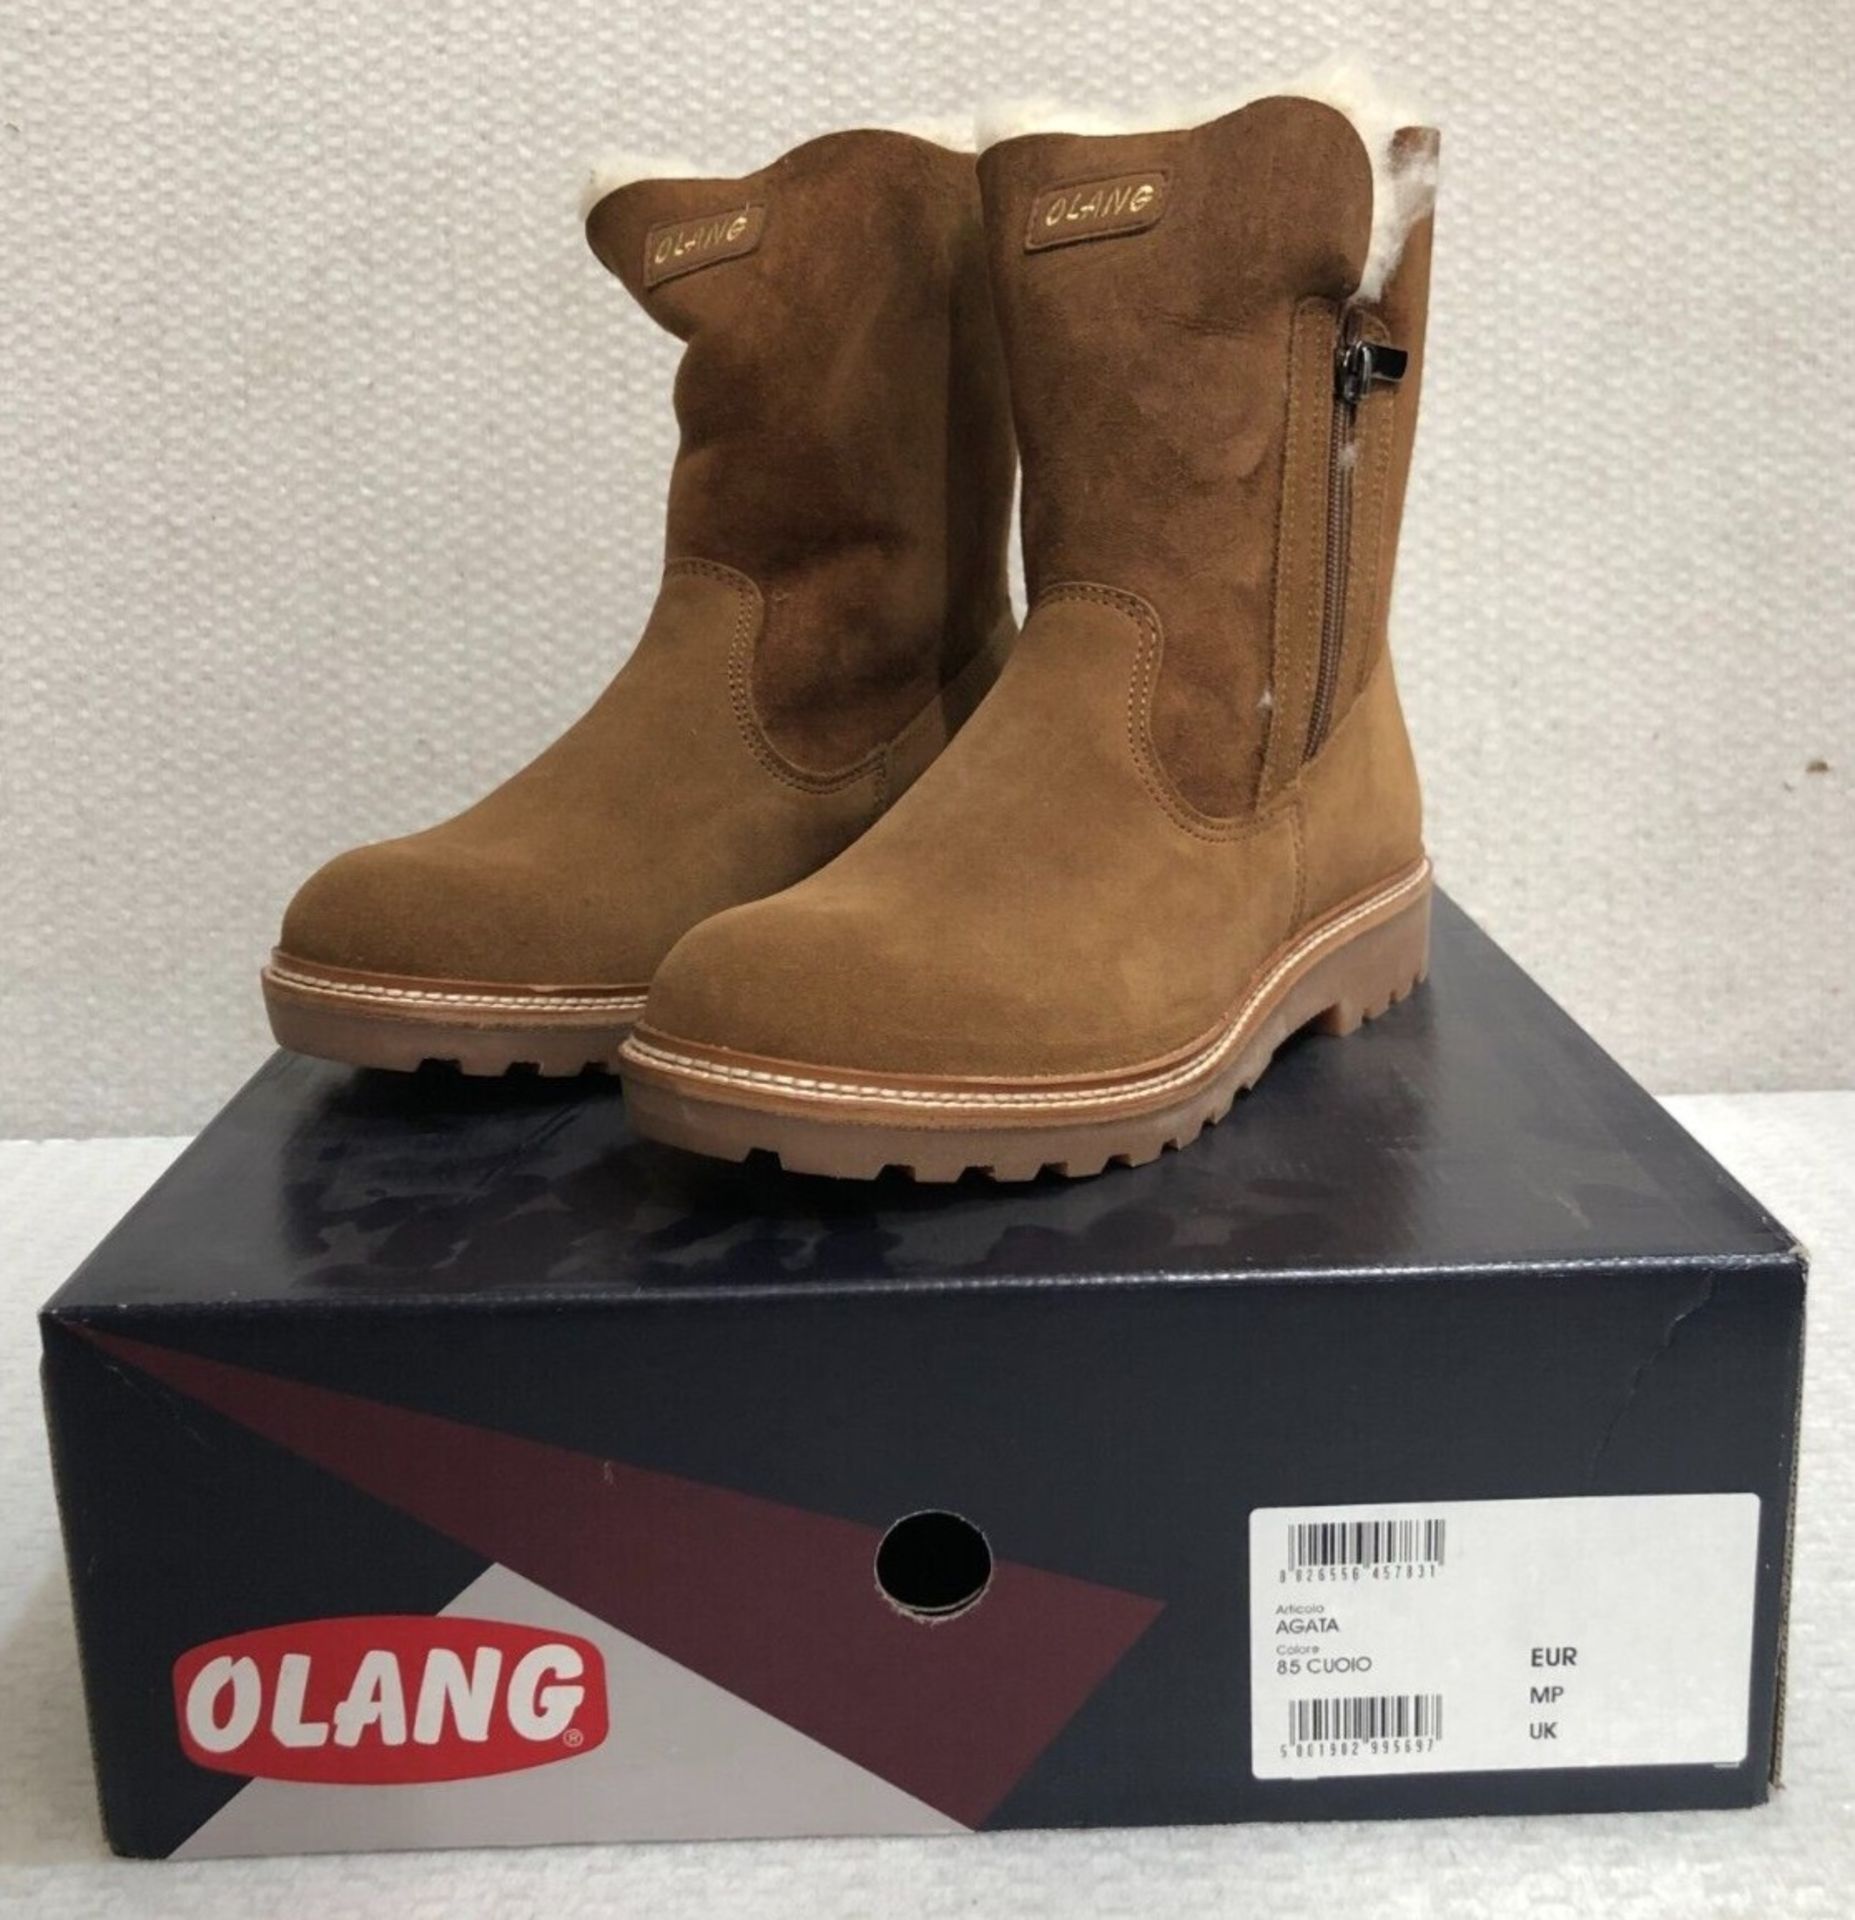 1 x Pair of Designer Olang Women's Winter Boots - Agata 85 Cuoio - Euro Size 37 - New Boxed - Image 3 of 4